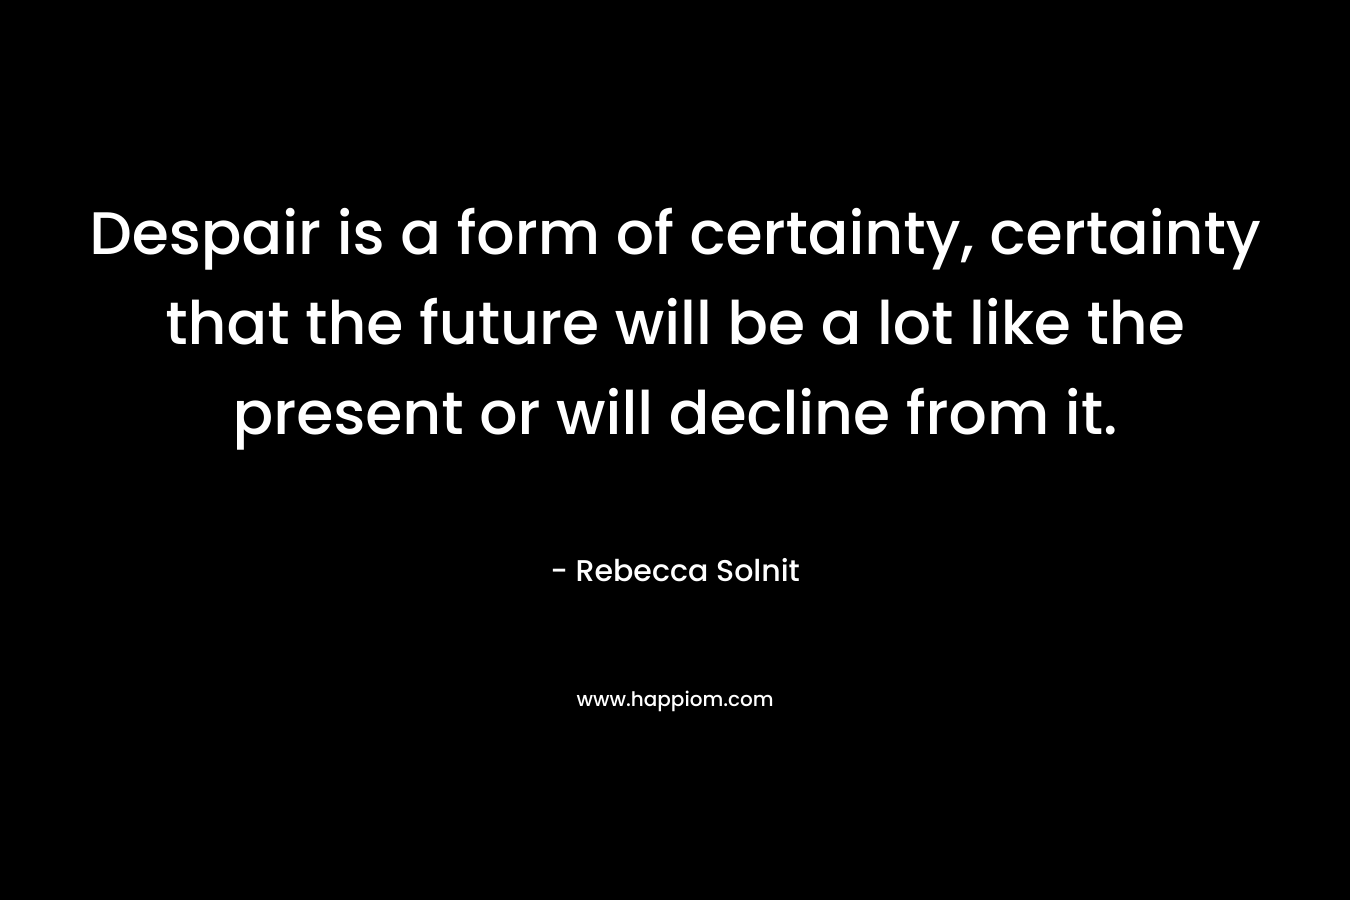 Despair is a form of certainty, certainty that the future will be a lot like the present or will decline from it. – Rebecca Solnit